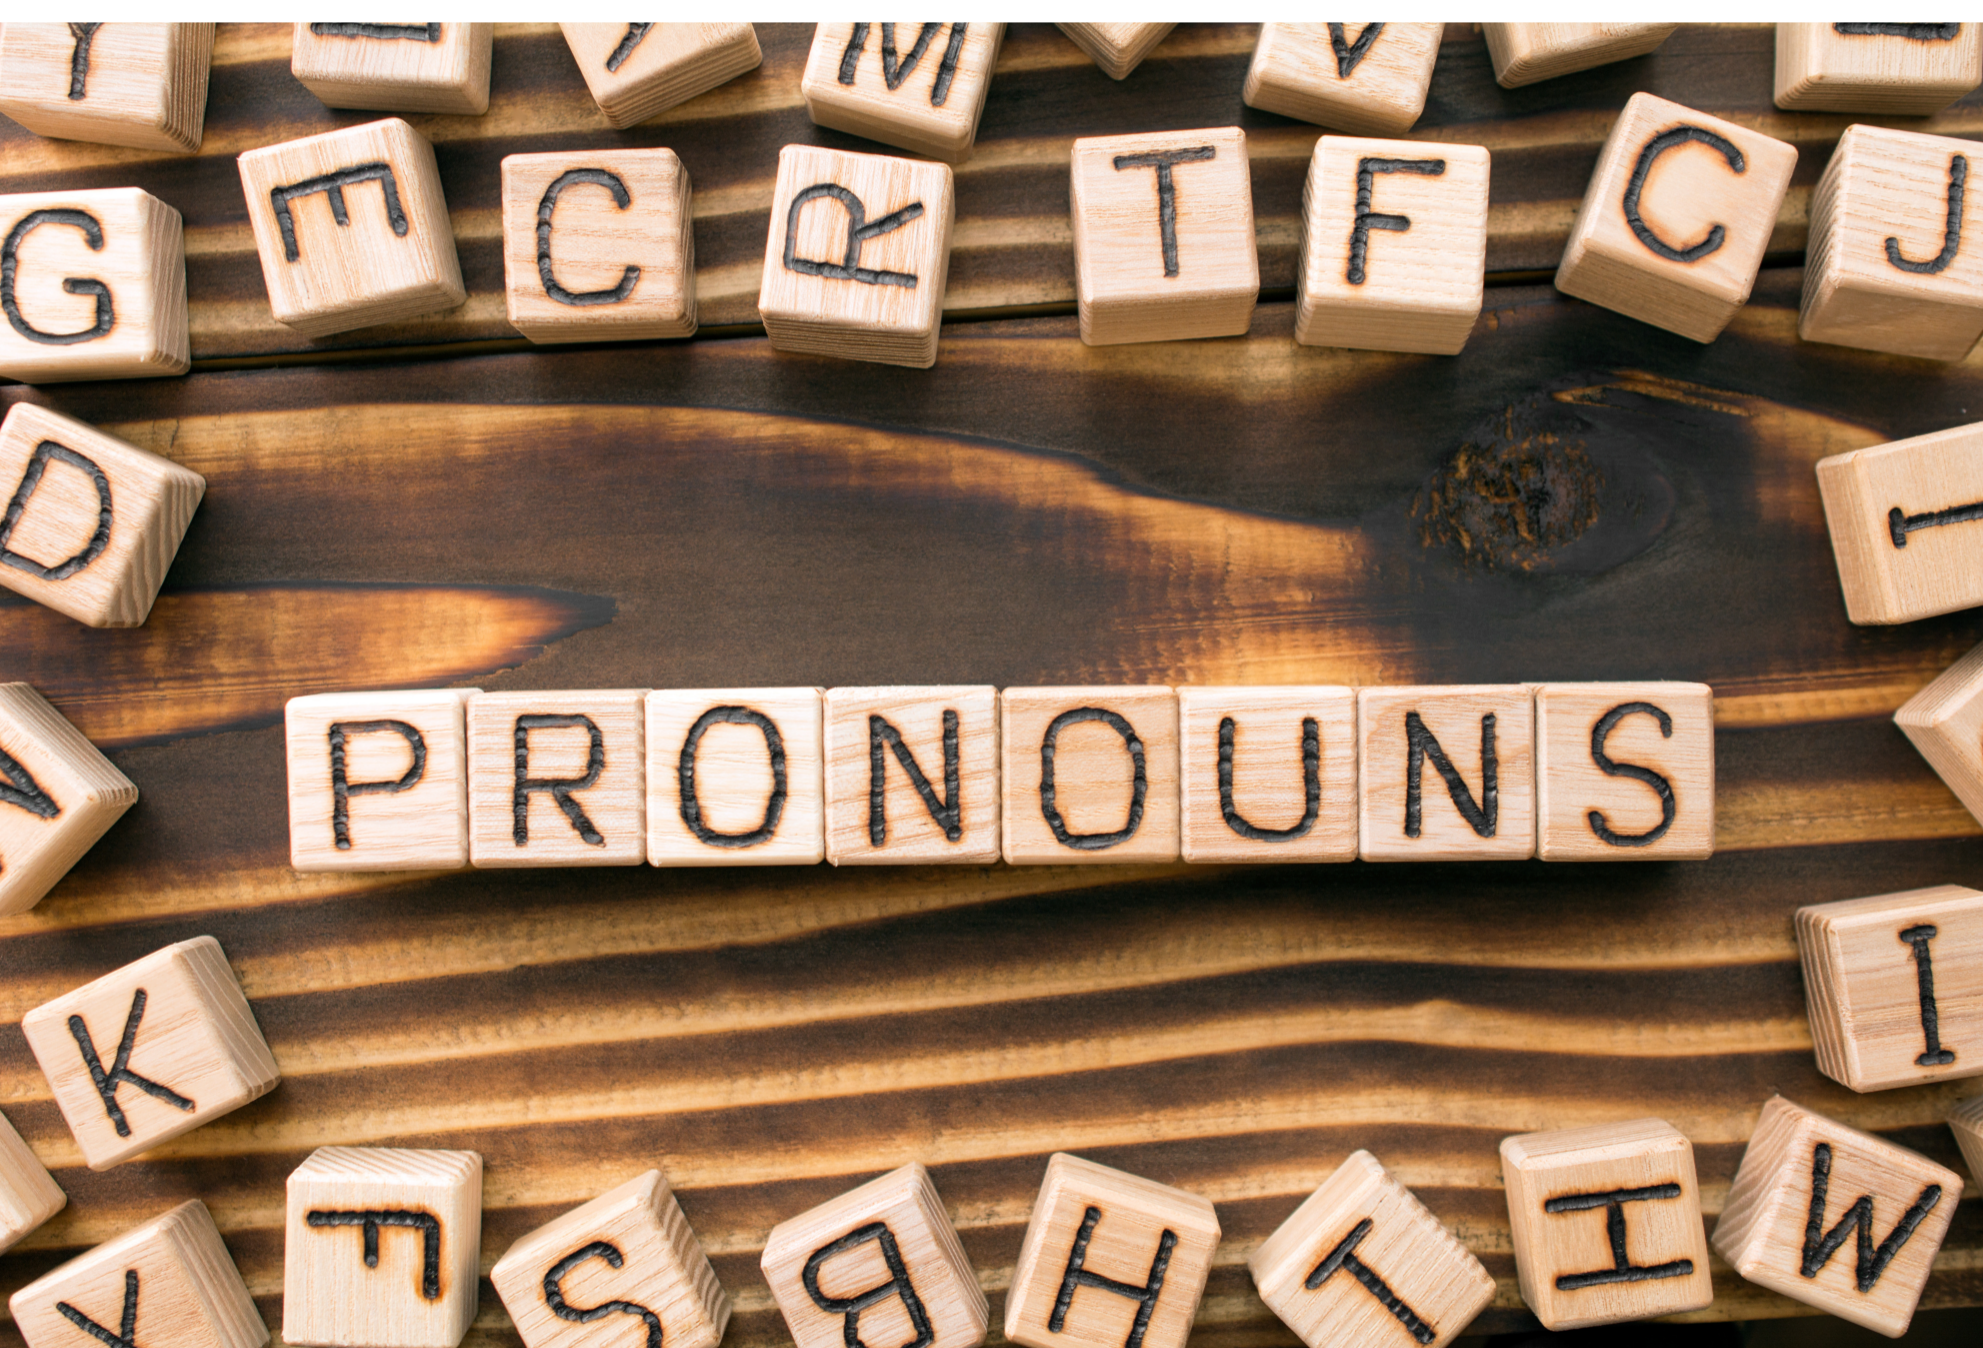 Pronouns-image-from-Canva-1